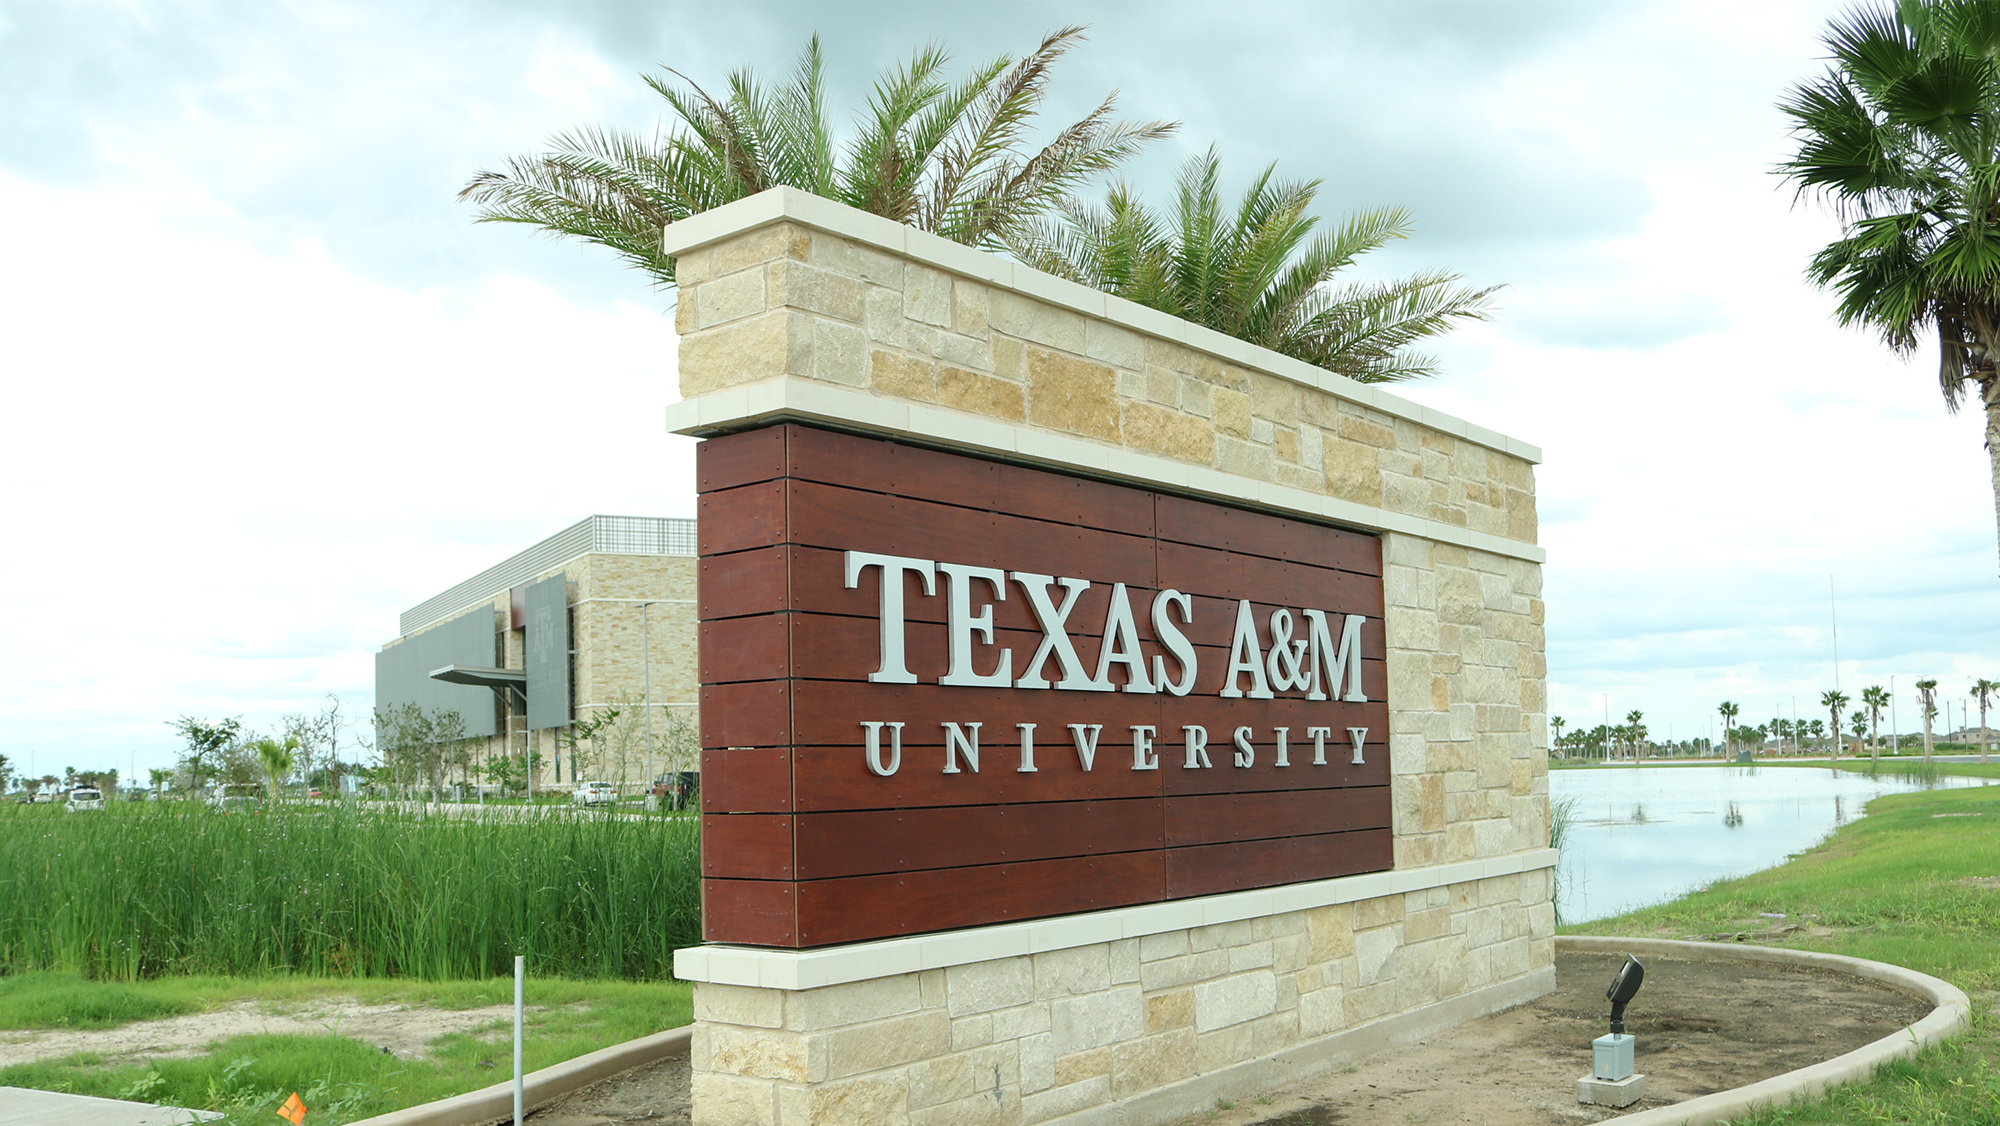 Contact Texas A&M University Engineering